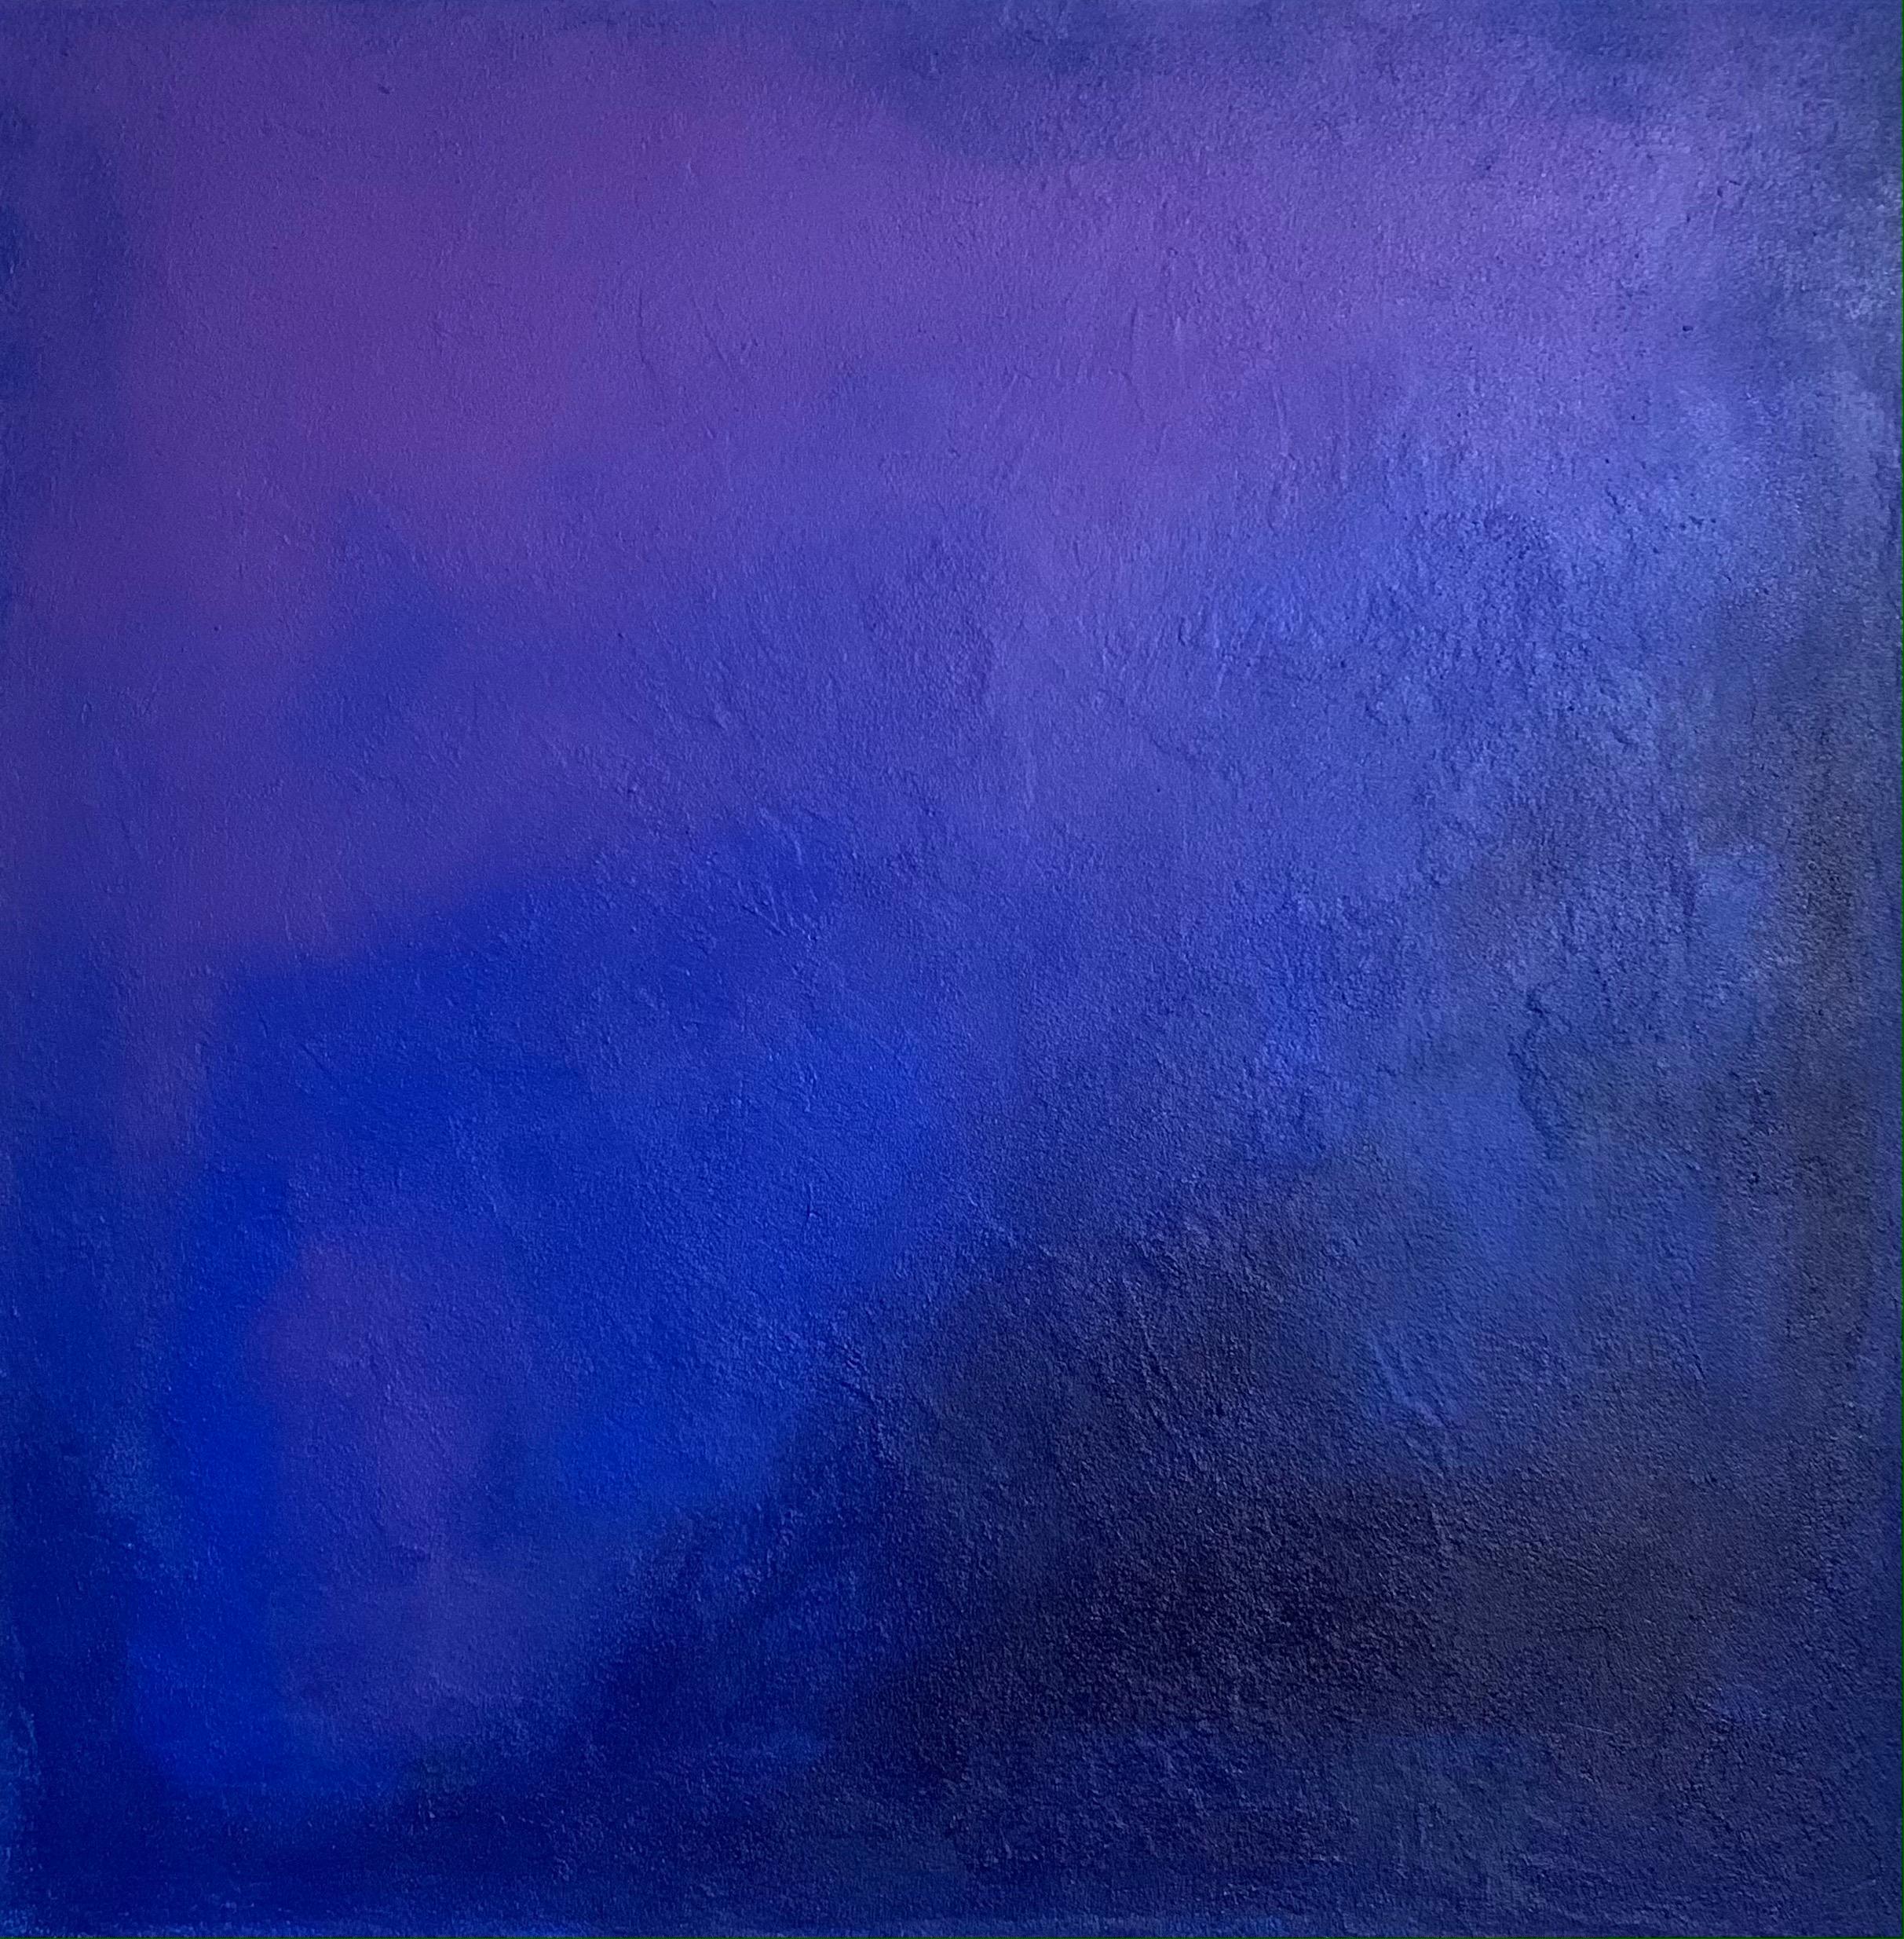 Iryna Antoniuk Landscape Painting - Blue and Violet Sand Effect Abstract Textured Painting